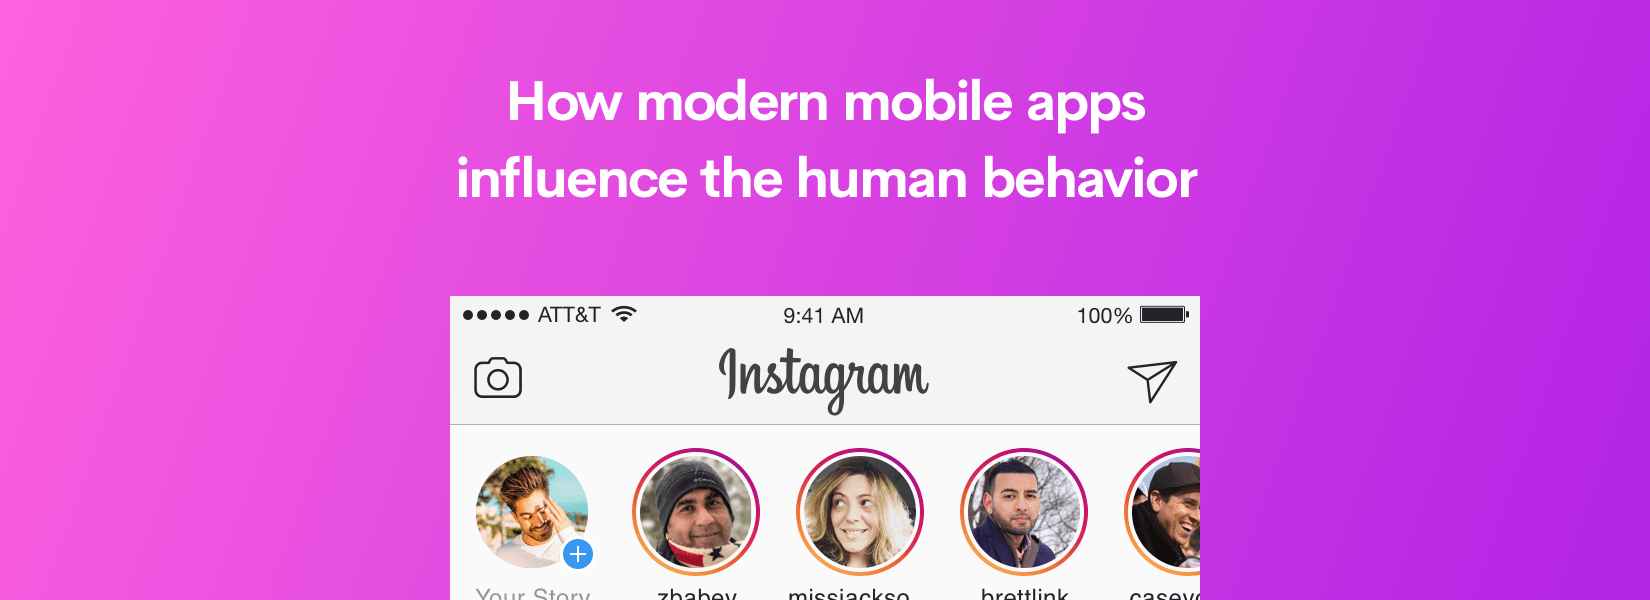 How modern mobile apps influence the human behavior